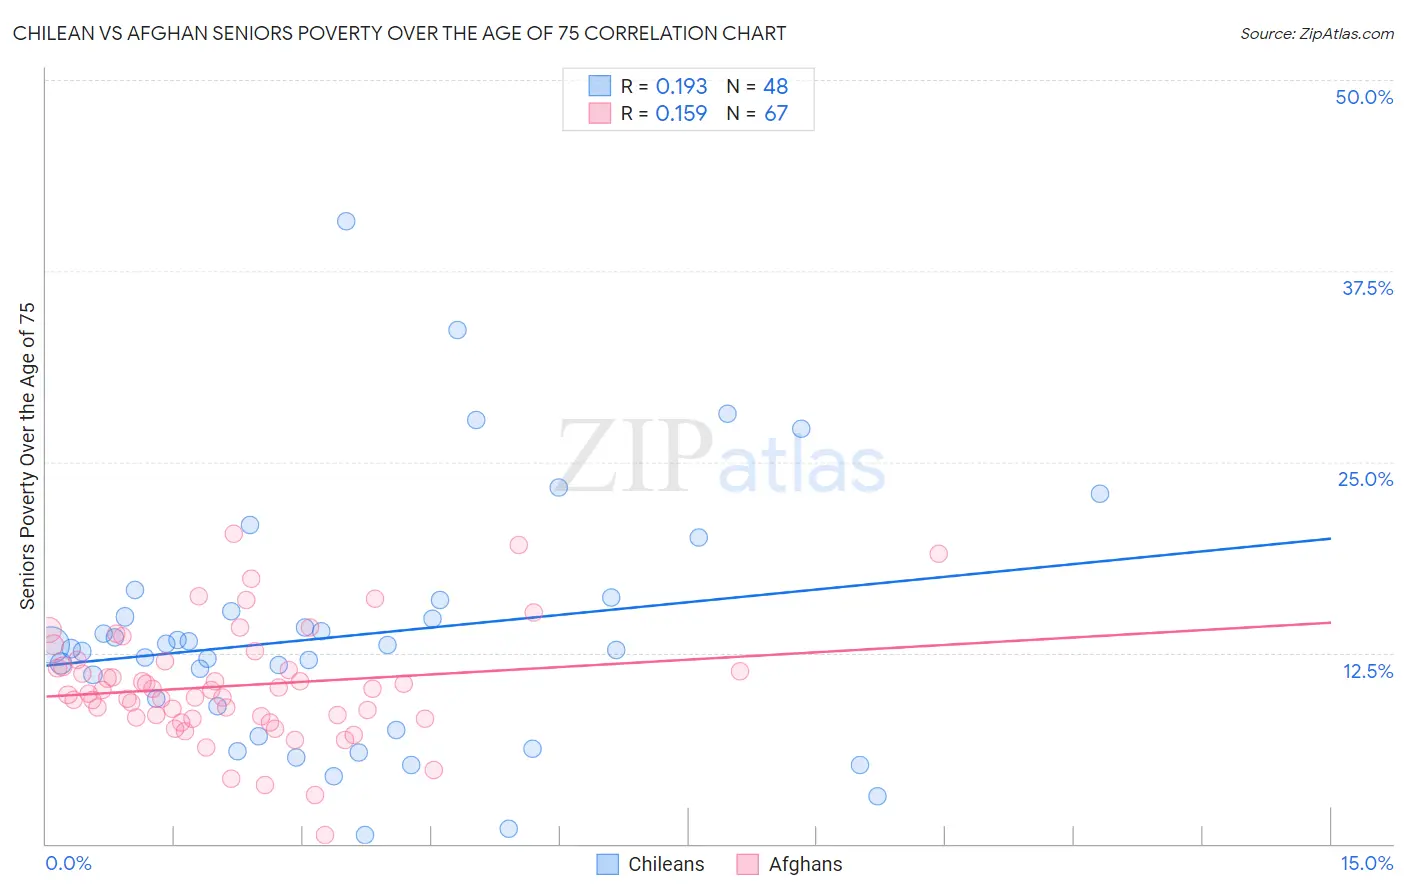 Chilean vs Afghan Seniors Poverty Over the Age of 75